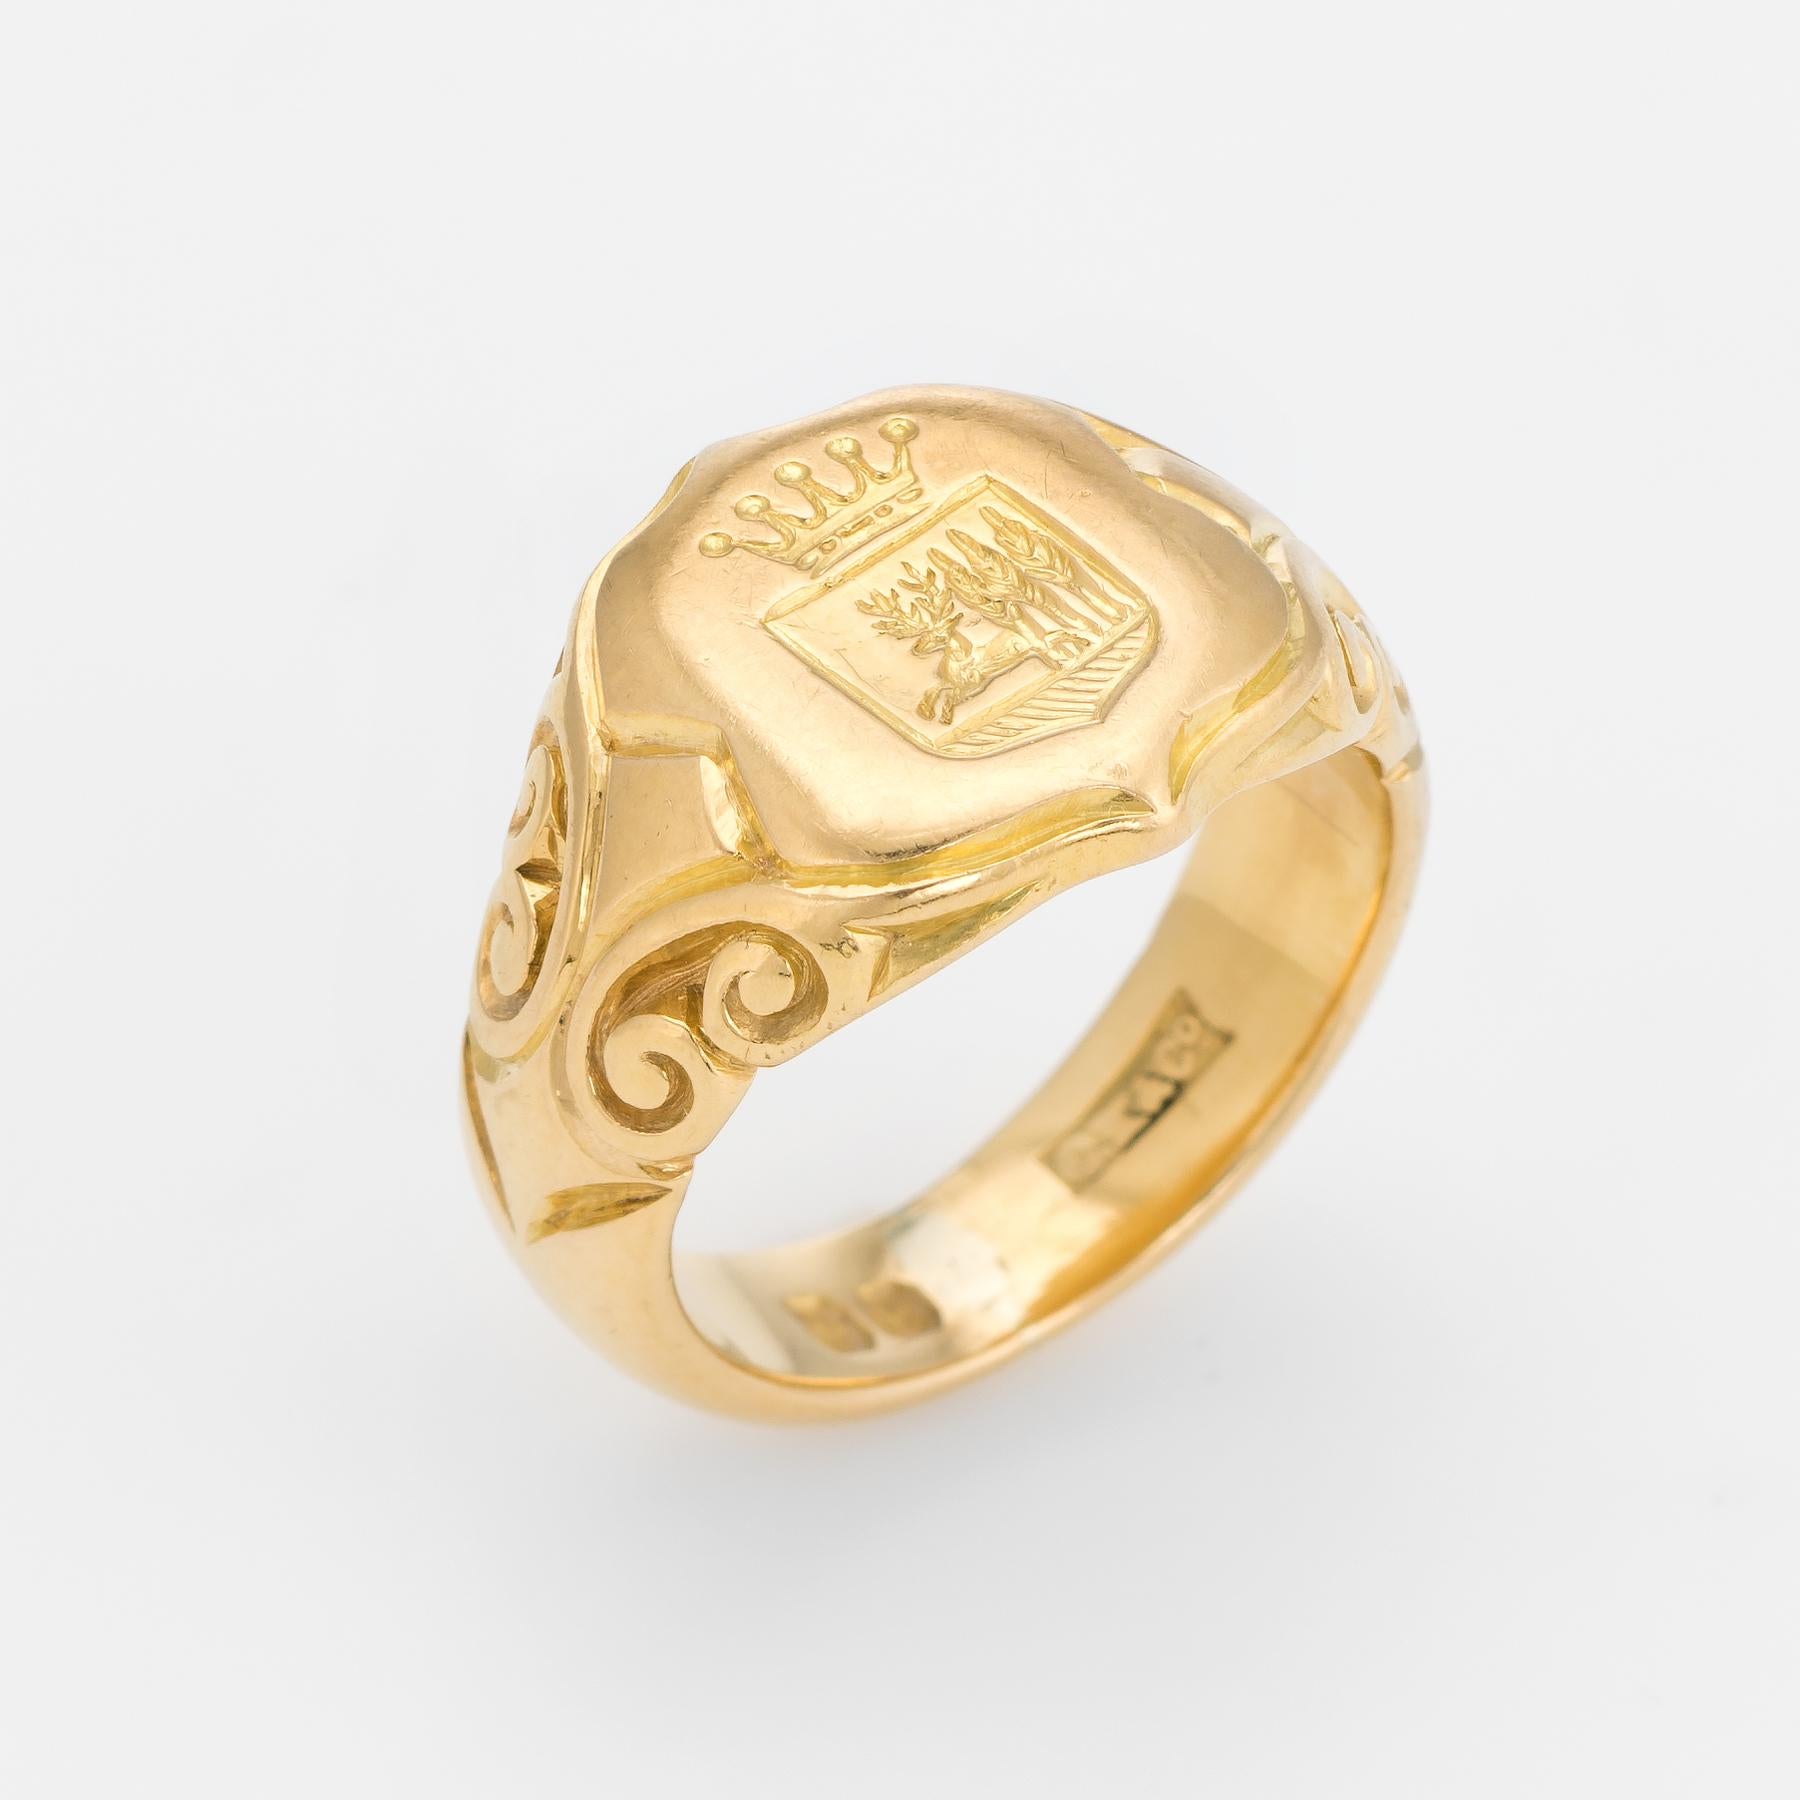 Finely detailed Men's antique Victorian era signet ring (circa 1880s to 1900s), crafted in 18 karat yellow gold. 

The shield shaped mount features a family crest with a deer appearing to bound from three wheat sheaves (possible reference to